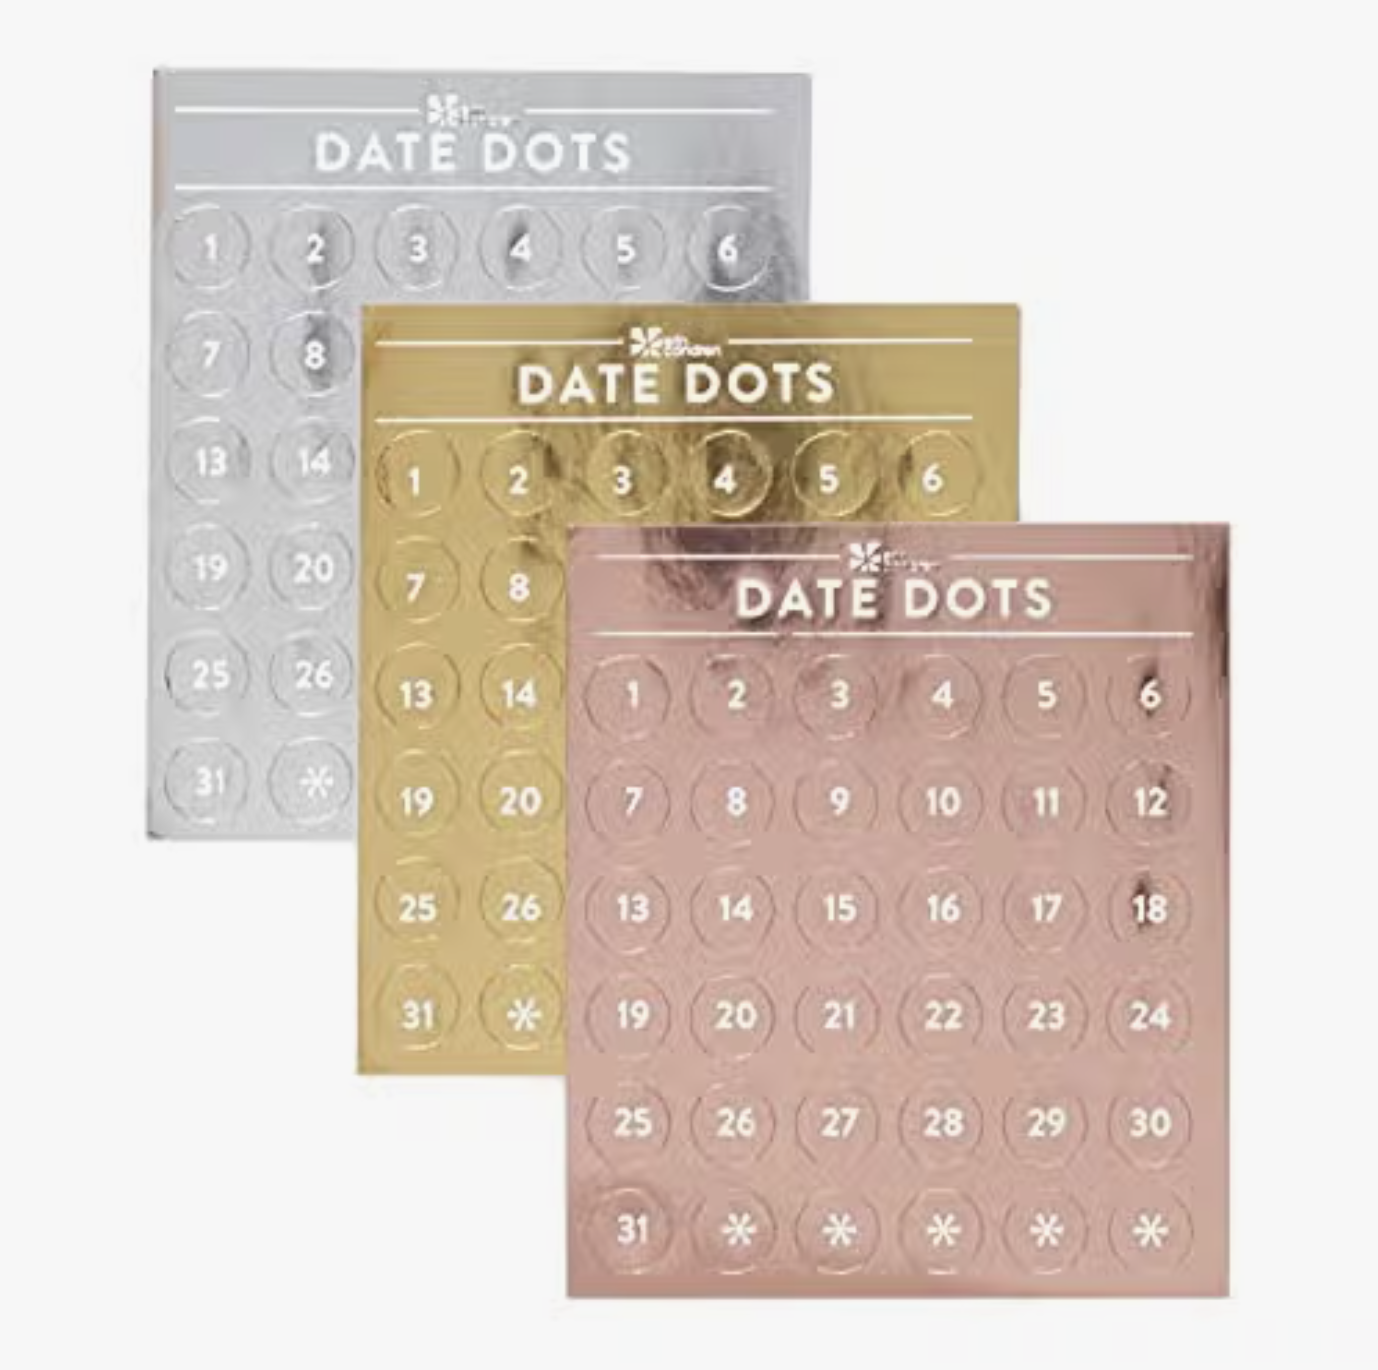 Keep track of your dates with our Date Dots Planner Sticker Pack. This pack includes a variety of circular stickers with date numbers, ideal for adding a functional and decorative element to your planner spreads. These stickers from Erin Condren are sold at BBB Supplies Craft Shop.